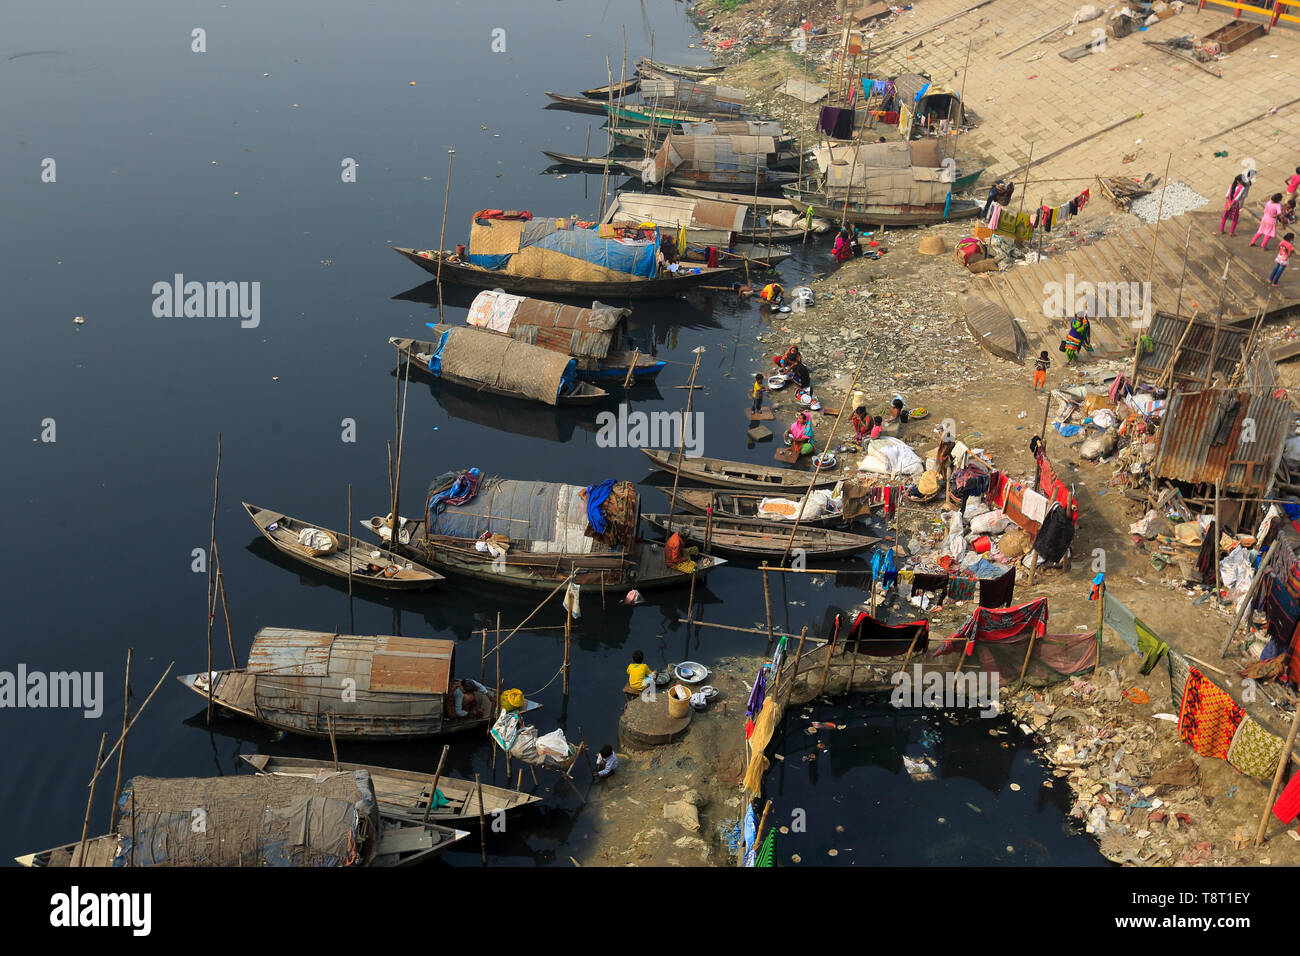 Gypsy women and girls, who live on houseboats, do all the domestic cleaning in the pitch-dark, polluted water of the Turag River at Tongi in Gazipur.  Stock Photo